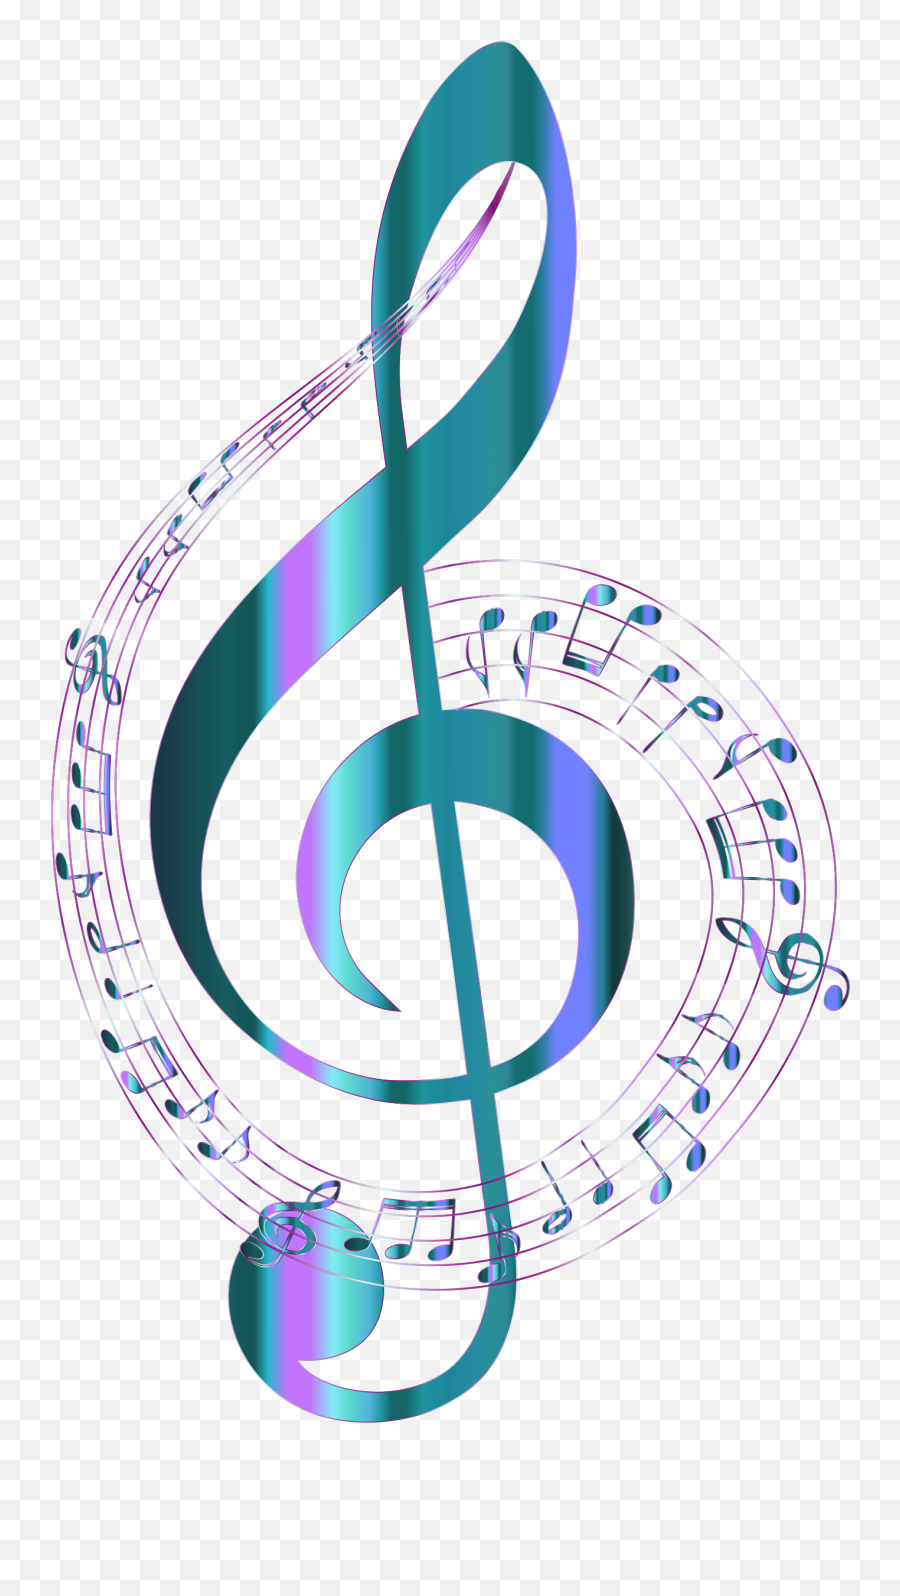 Music Ideas In 2021 Emoji,Guess The Emoji Eyes And Music Notes